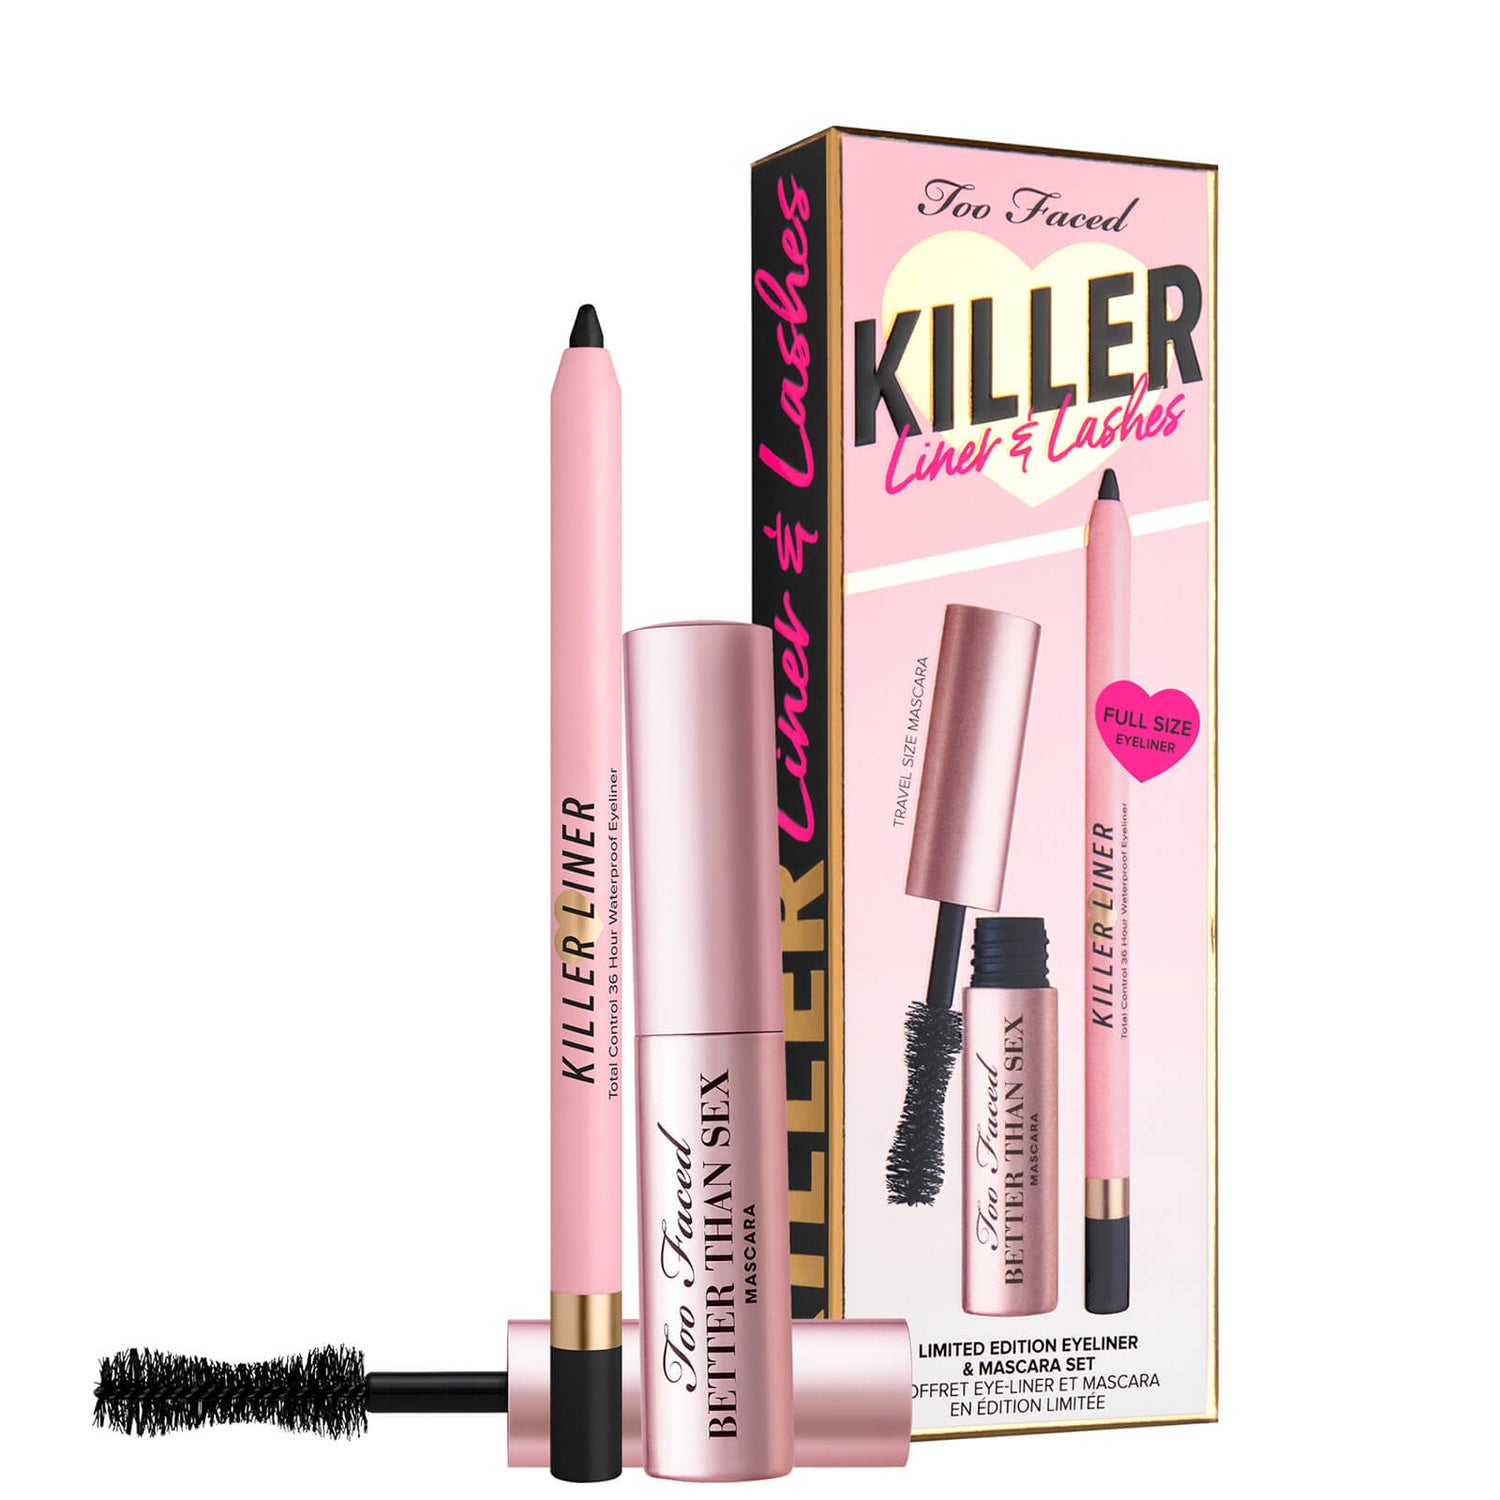 Too Faced Limited Edition Killer Lashes and Liner Mascara and Eyeliner Duo (Worth £28.00)